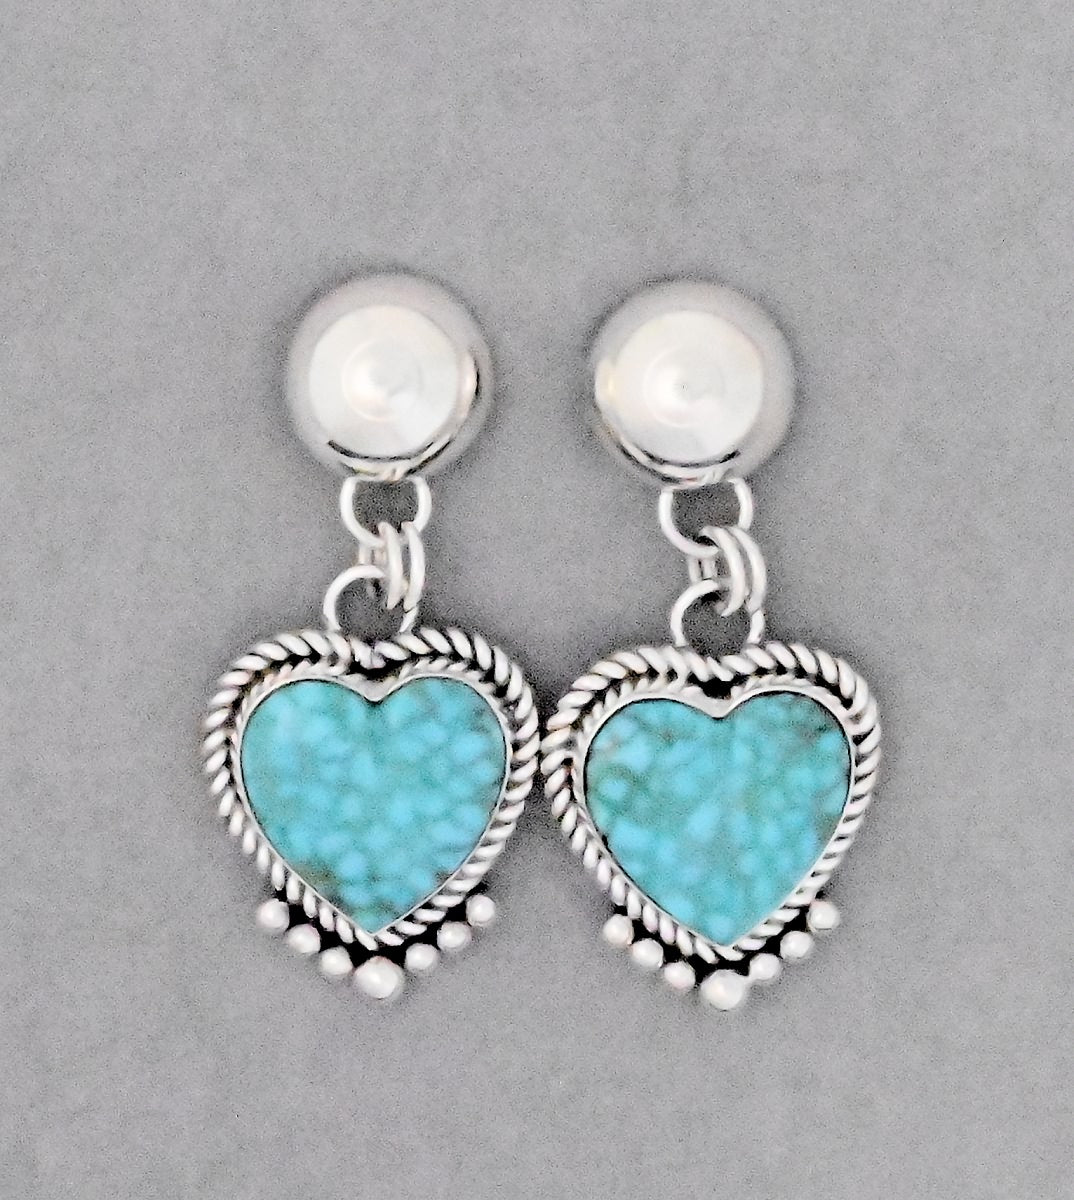 Earrings with Kingman Waterweb Turquoise Hearts by Artie Yellowhorse